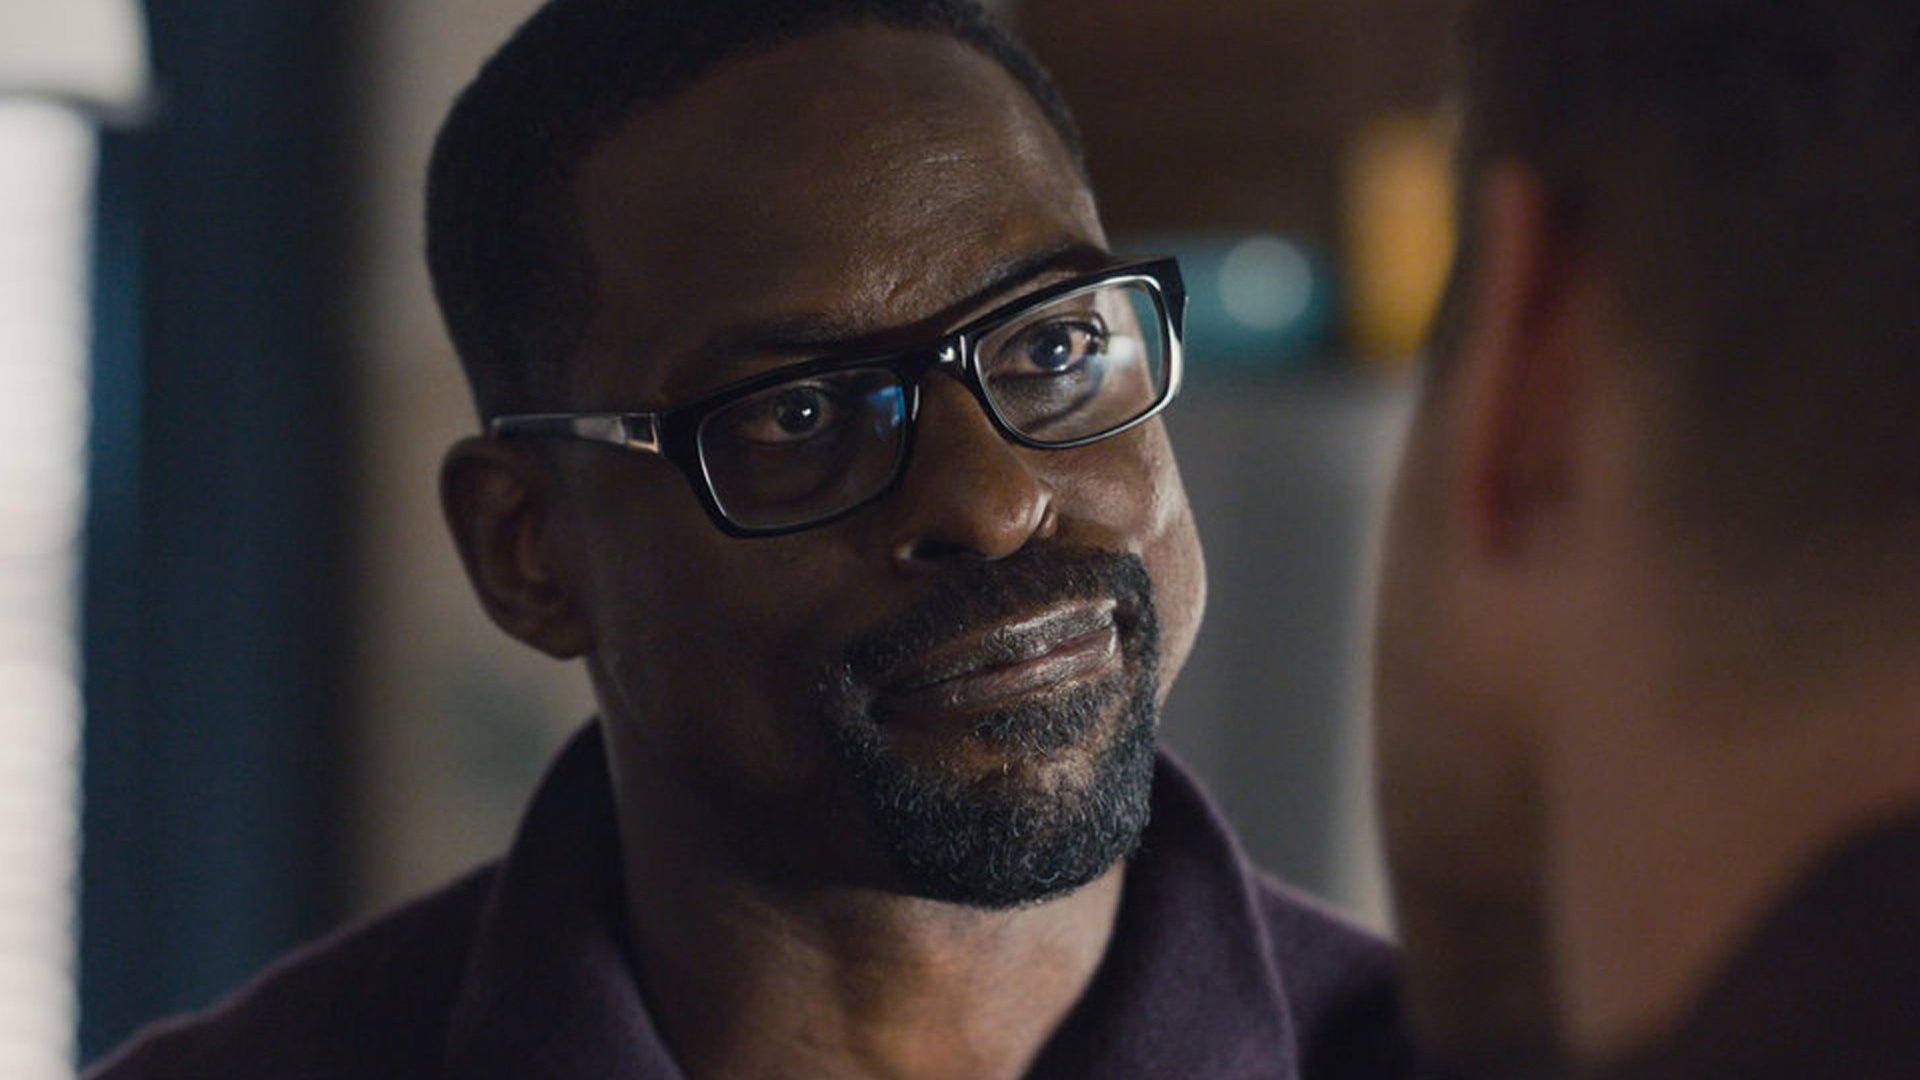 Sterling K. Brown as Randall, Justin Hartley as Kevin meeting up in Philadelphia in ‘This Is Us’ Season 5 Episode 13, “Brotherly Love.”